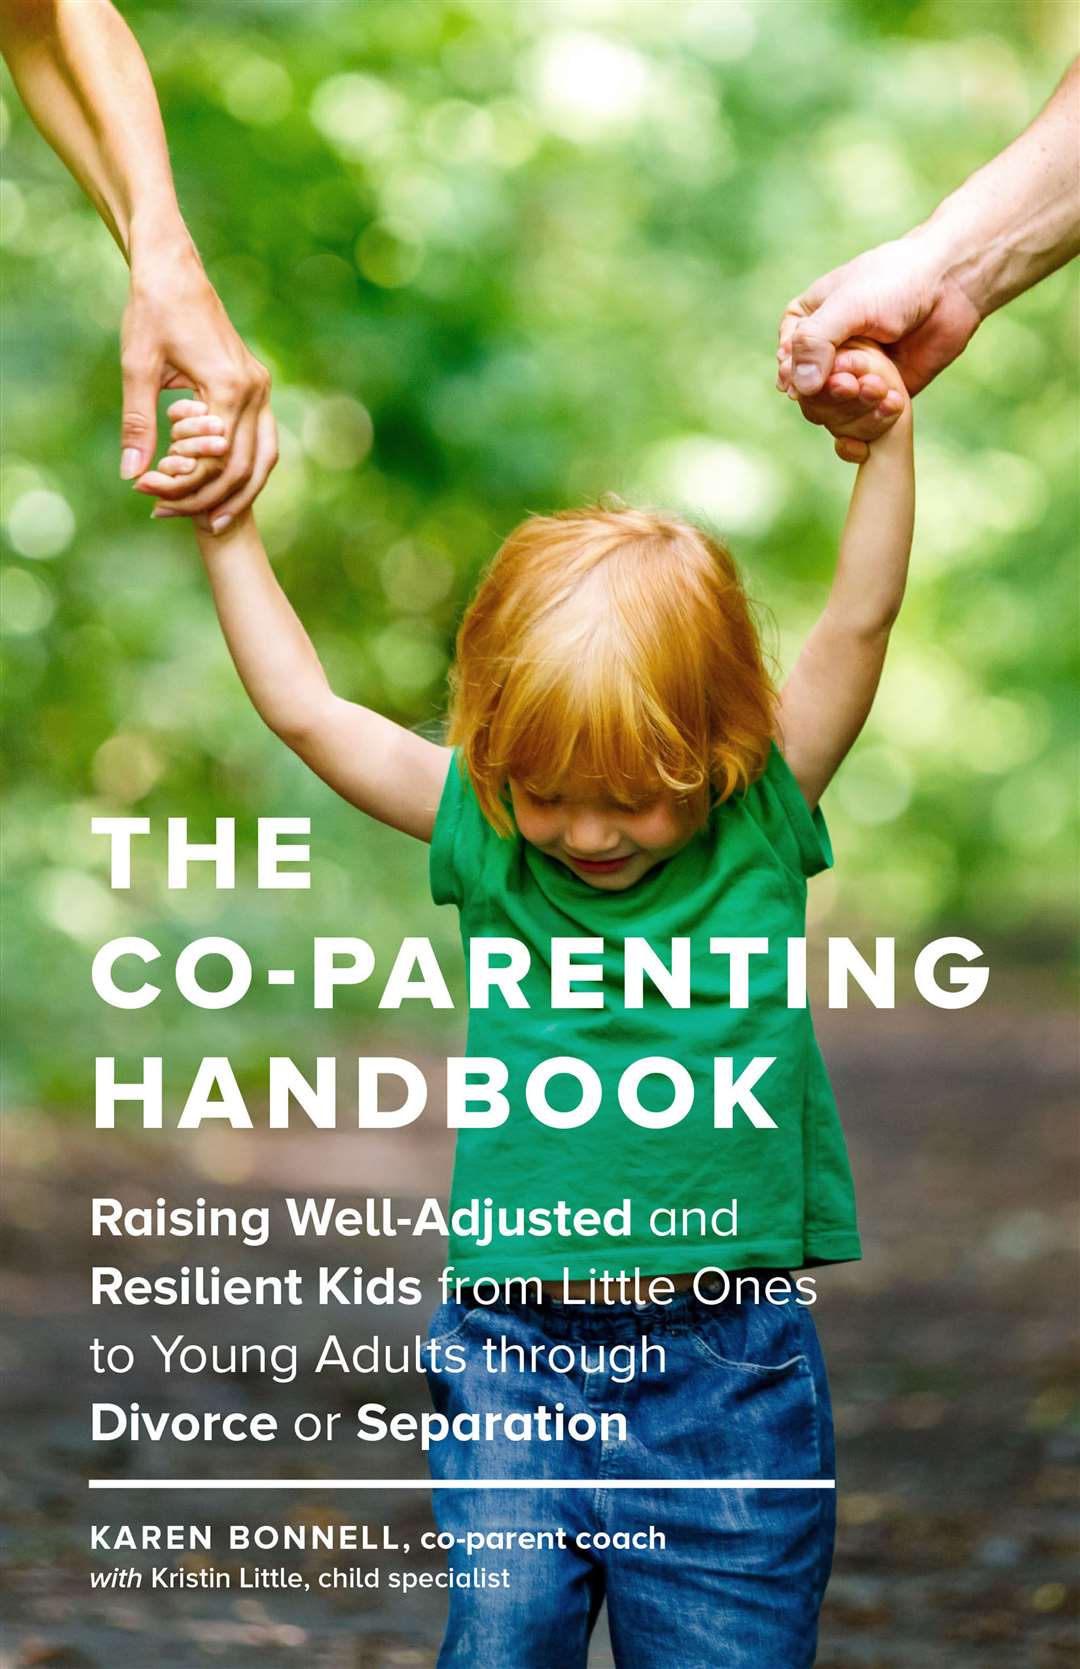 The Co-Parenting Handbook is published by Sasquatch, £17.99